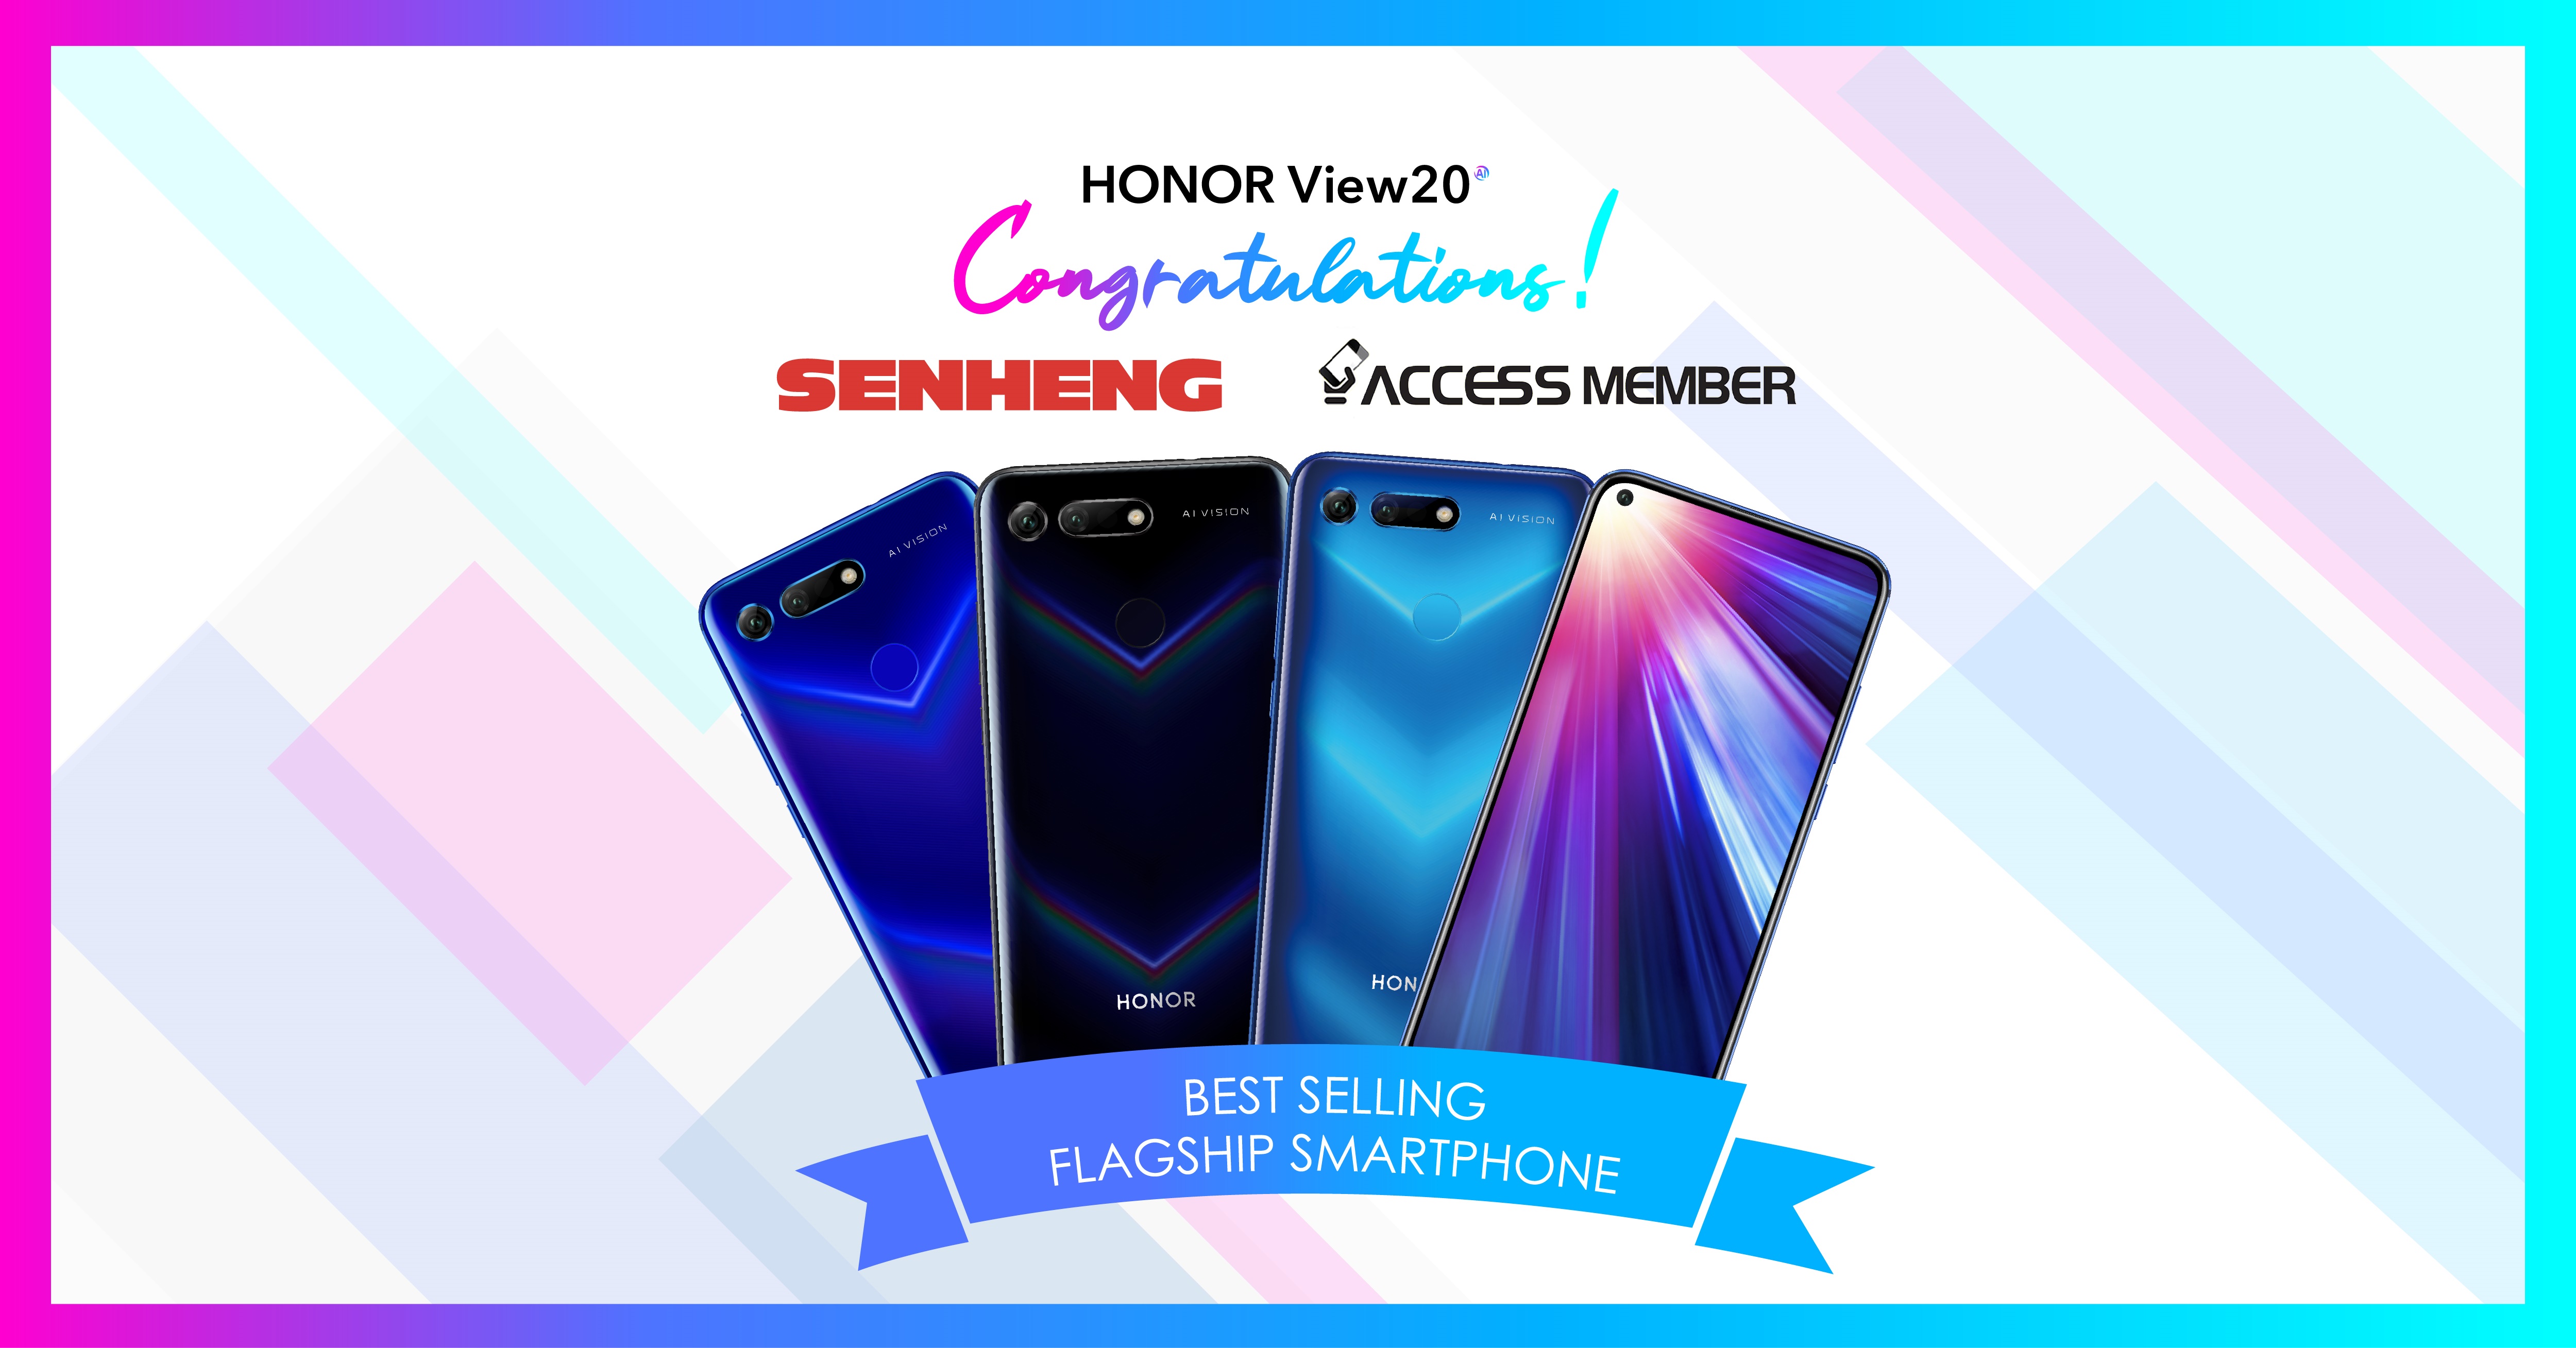 HONOR View 20 earned the top spot as the Best Selling Flagship Smartphone on Senheng and Access Member